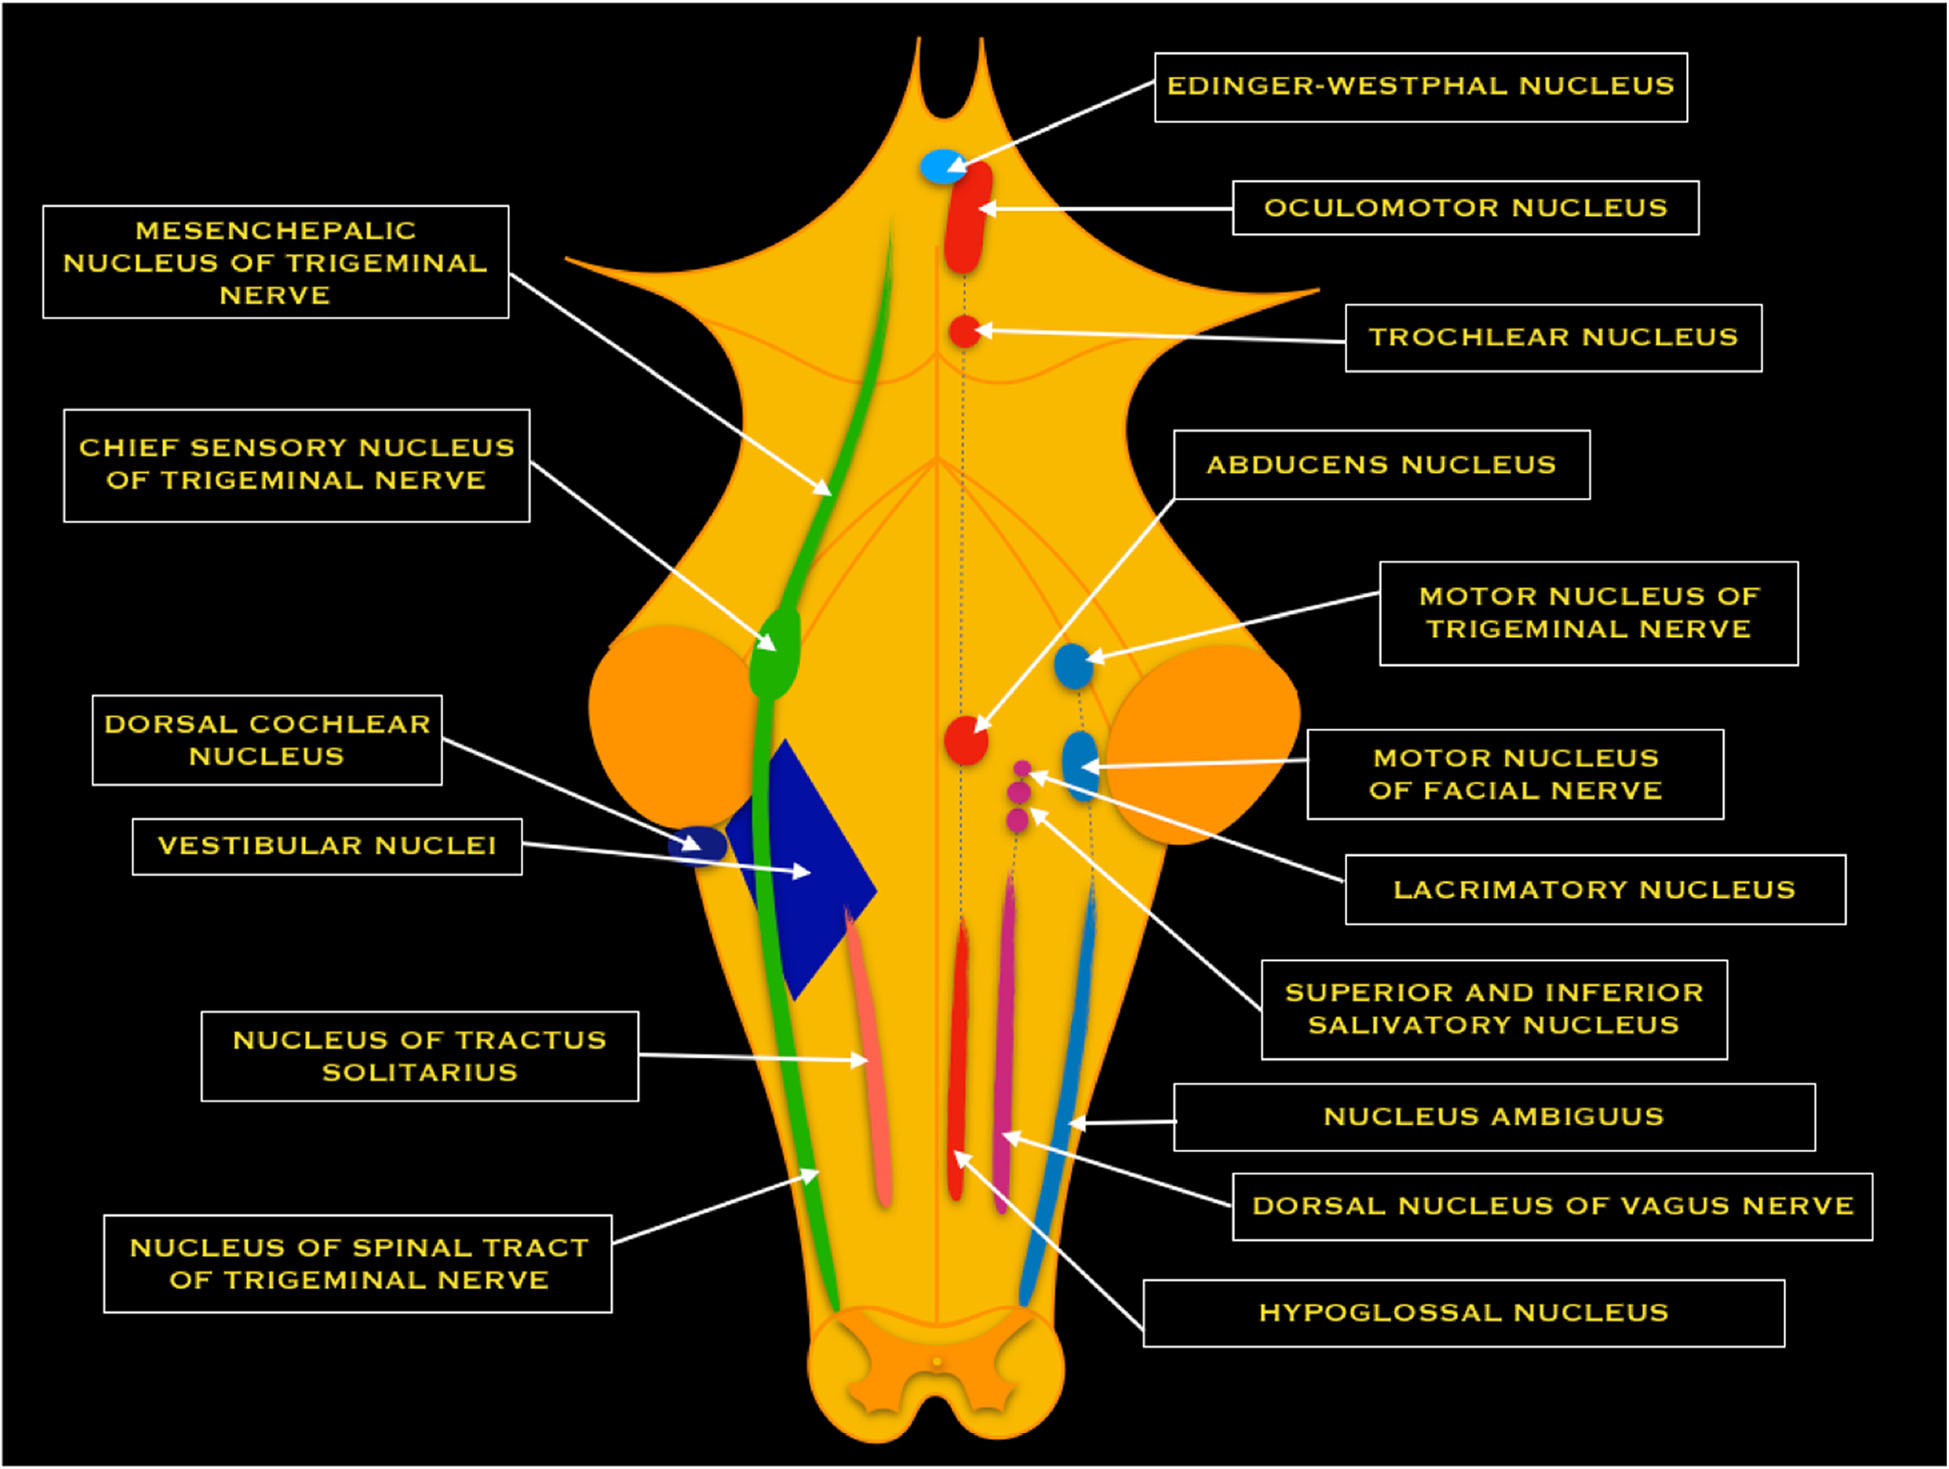 Schematic drawing of cranial nerve nuclei with vestibular complex shown